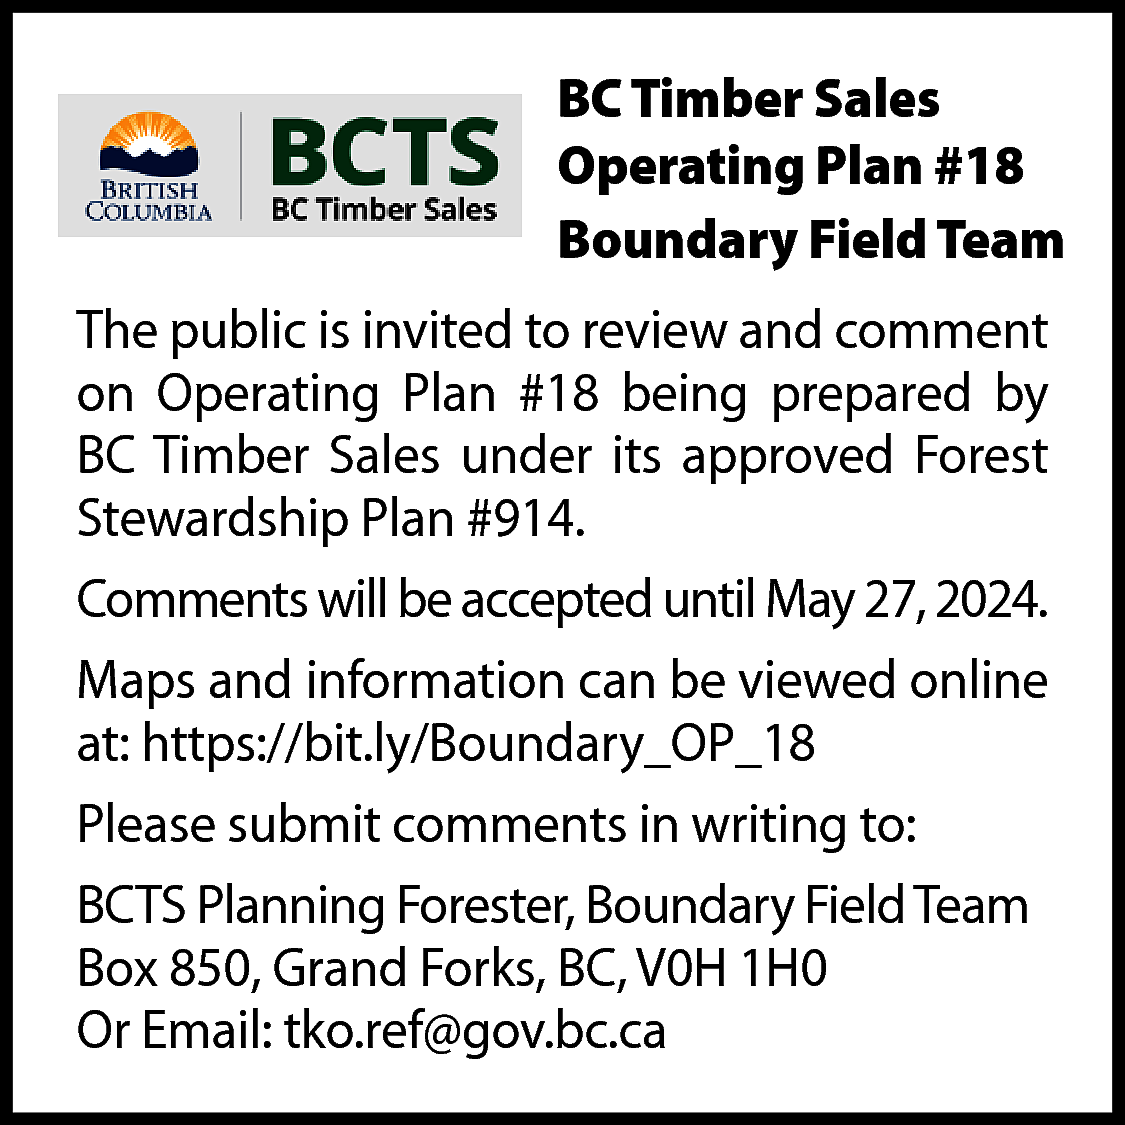 BC Timber Sales <br>Operating Plan  BC Timber Sales  Operating Plan #18  Boundary Field Team  The public is invited to review and comment  on Operating Plan #18 being prepared by  BC Timber Sales under its approved Forest  Stewardship Plan #914.  Comments will be accepted until May 27, 2024.  Maps and information can be viewed online  at: https://bit.ly/Boundary_OP_18  Please submit comments in writing to:  BCTS Planning Forester, Boundary Field Team  Box 850, Grand Forks, BC, V0H 1H0  Or Email: tko.ref@gov.bc.ca    